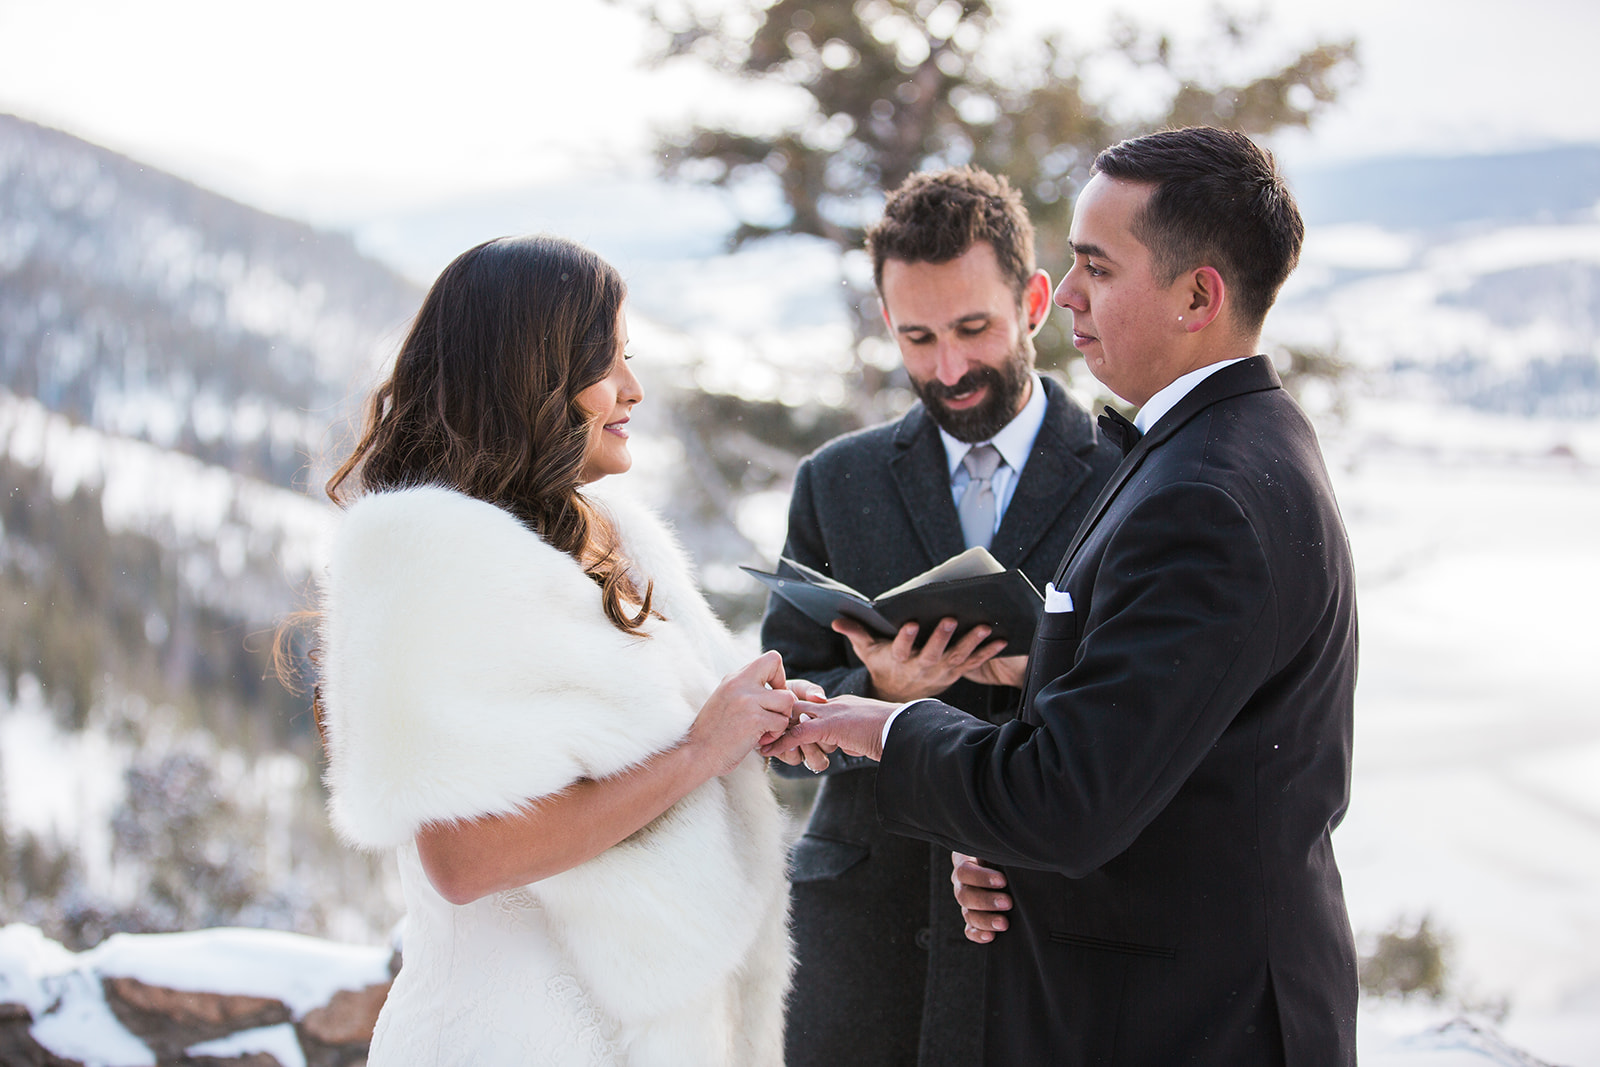 bride puts ring on groom in front of snowy Colorado mountain backdrop